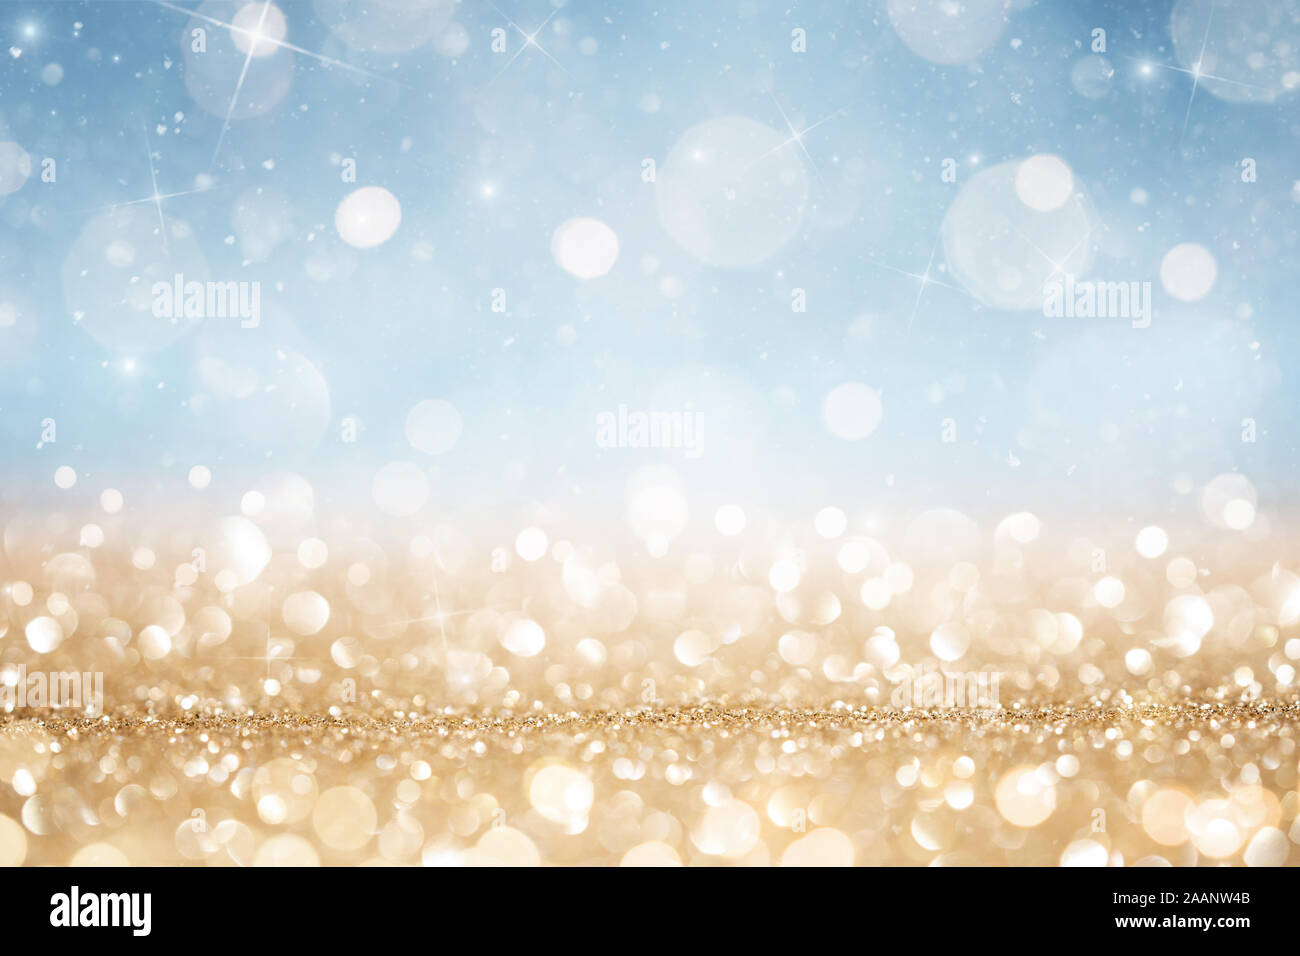 Abstract defocused gold and blue glitter background with copy space Stock  Photo - Alamy